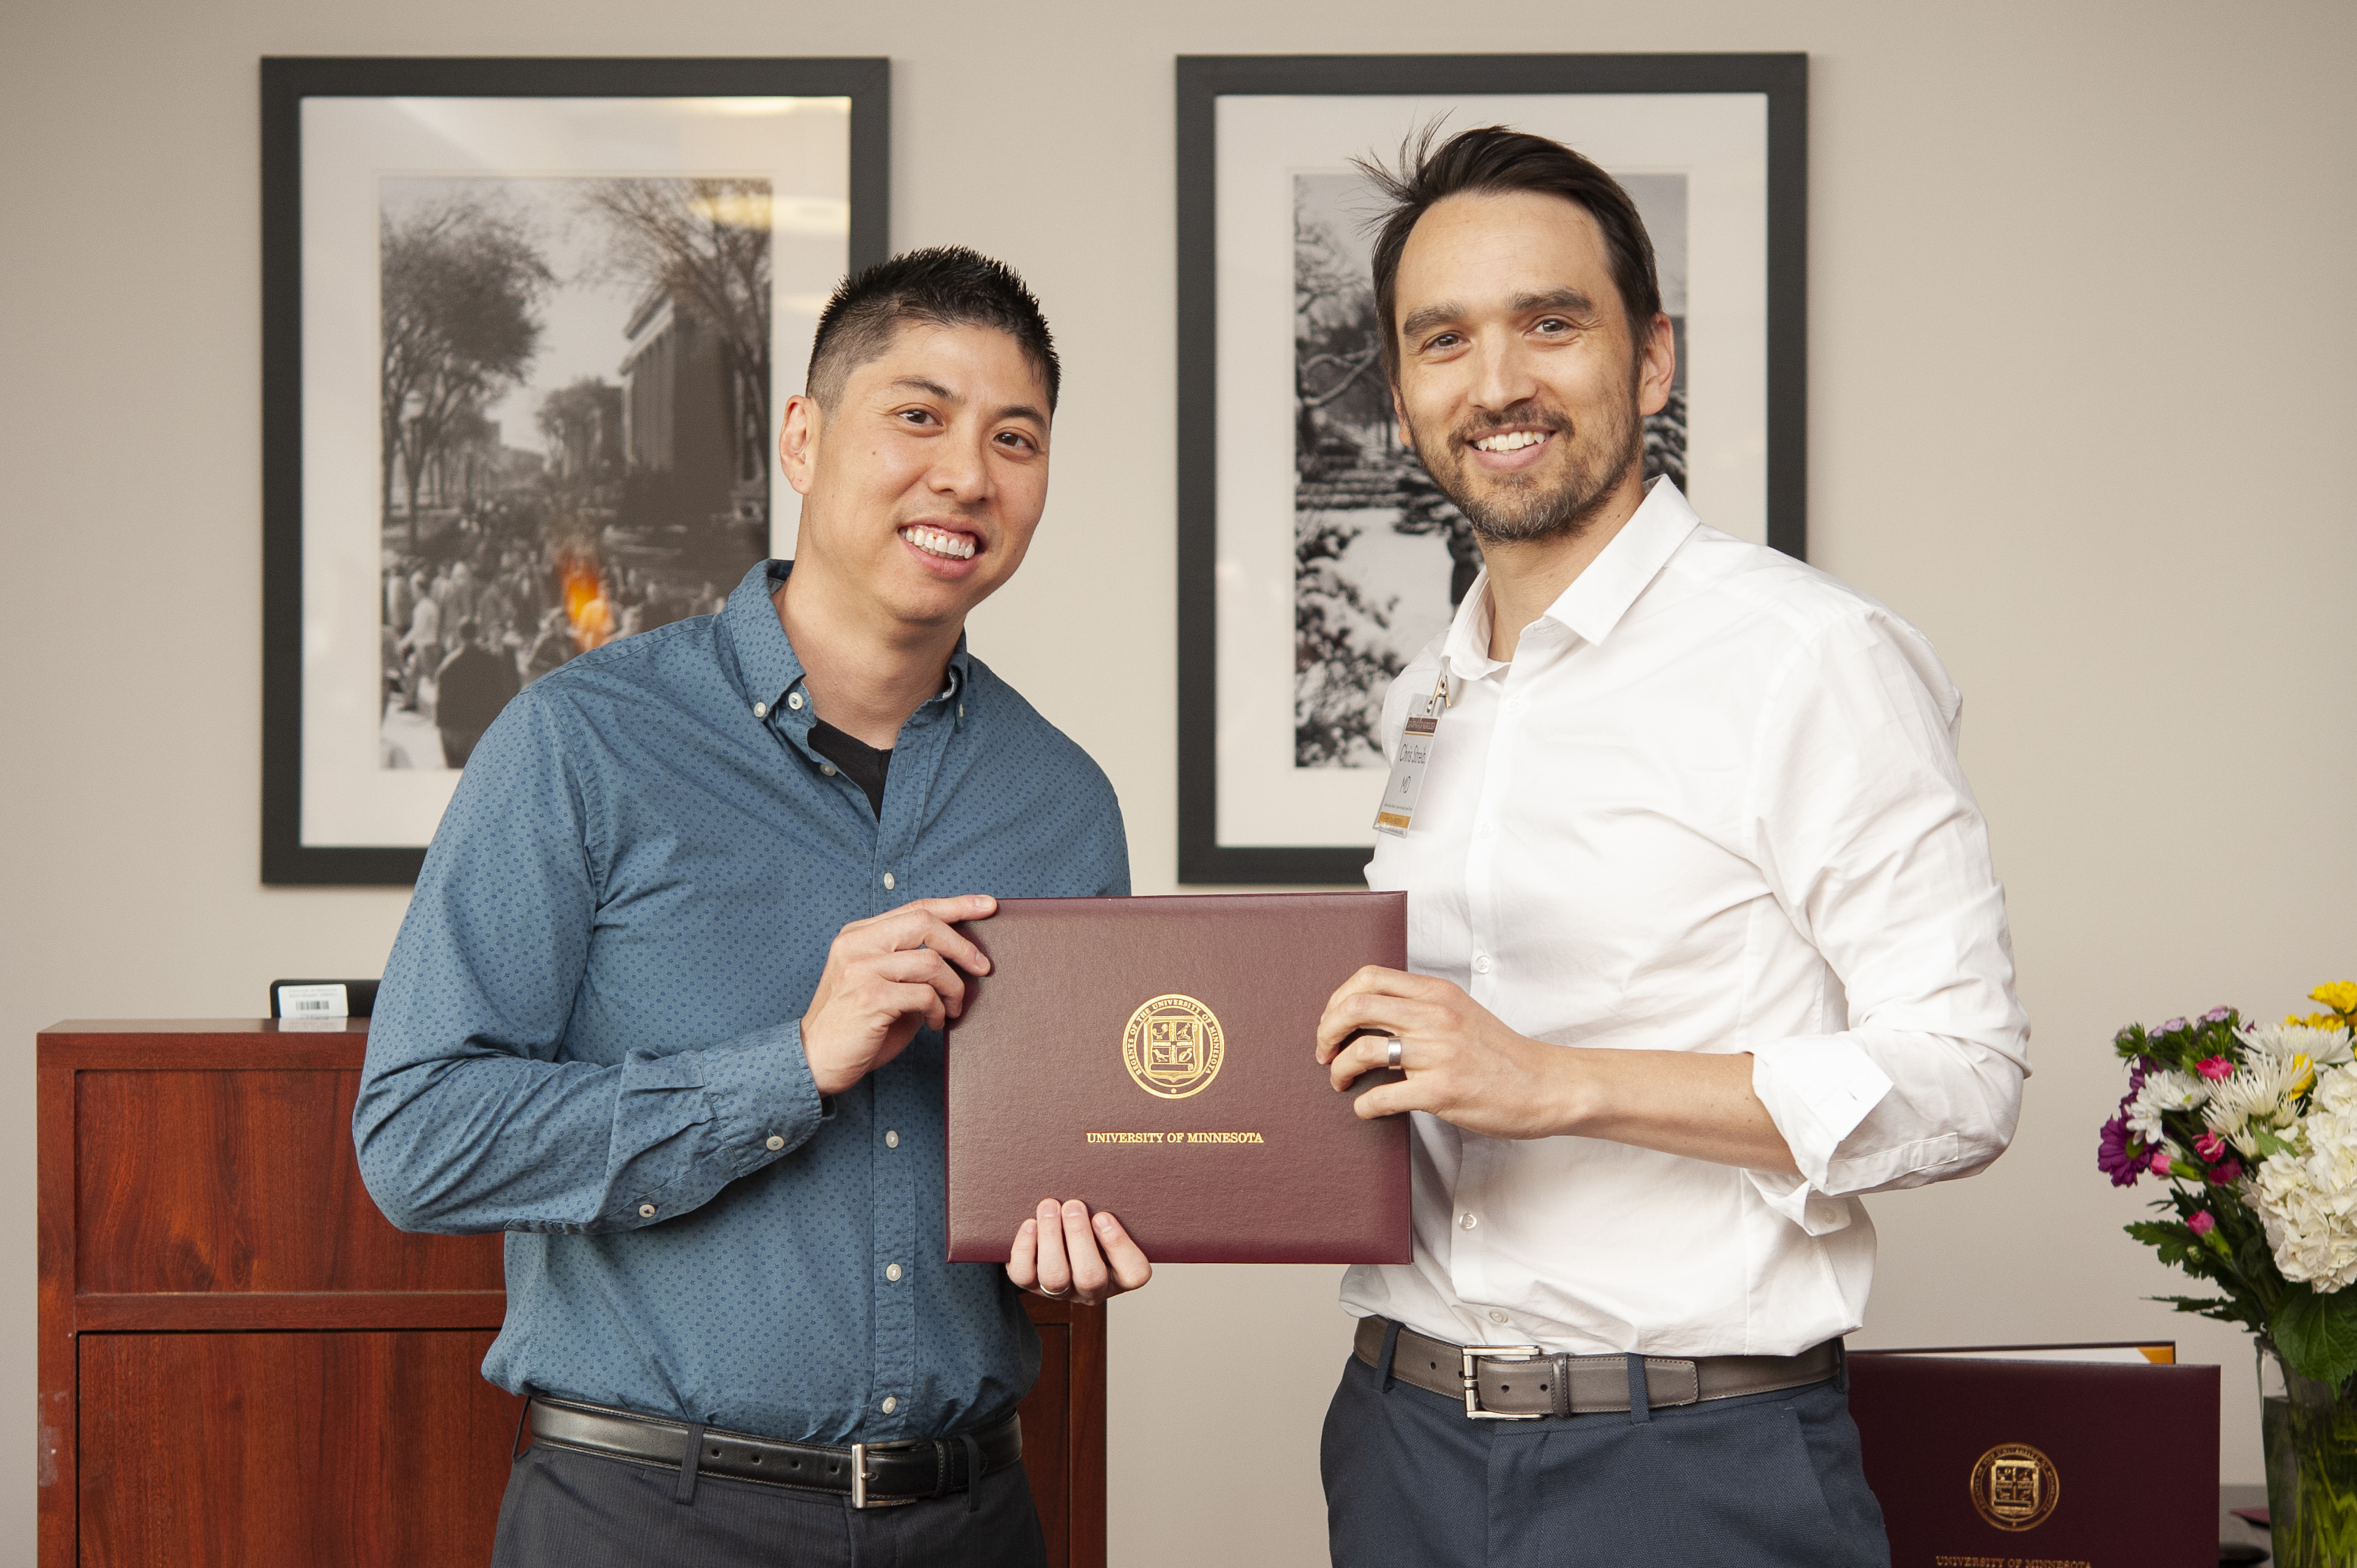 Dr. Streib presenting Dr. Nguyen with his diploma